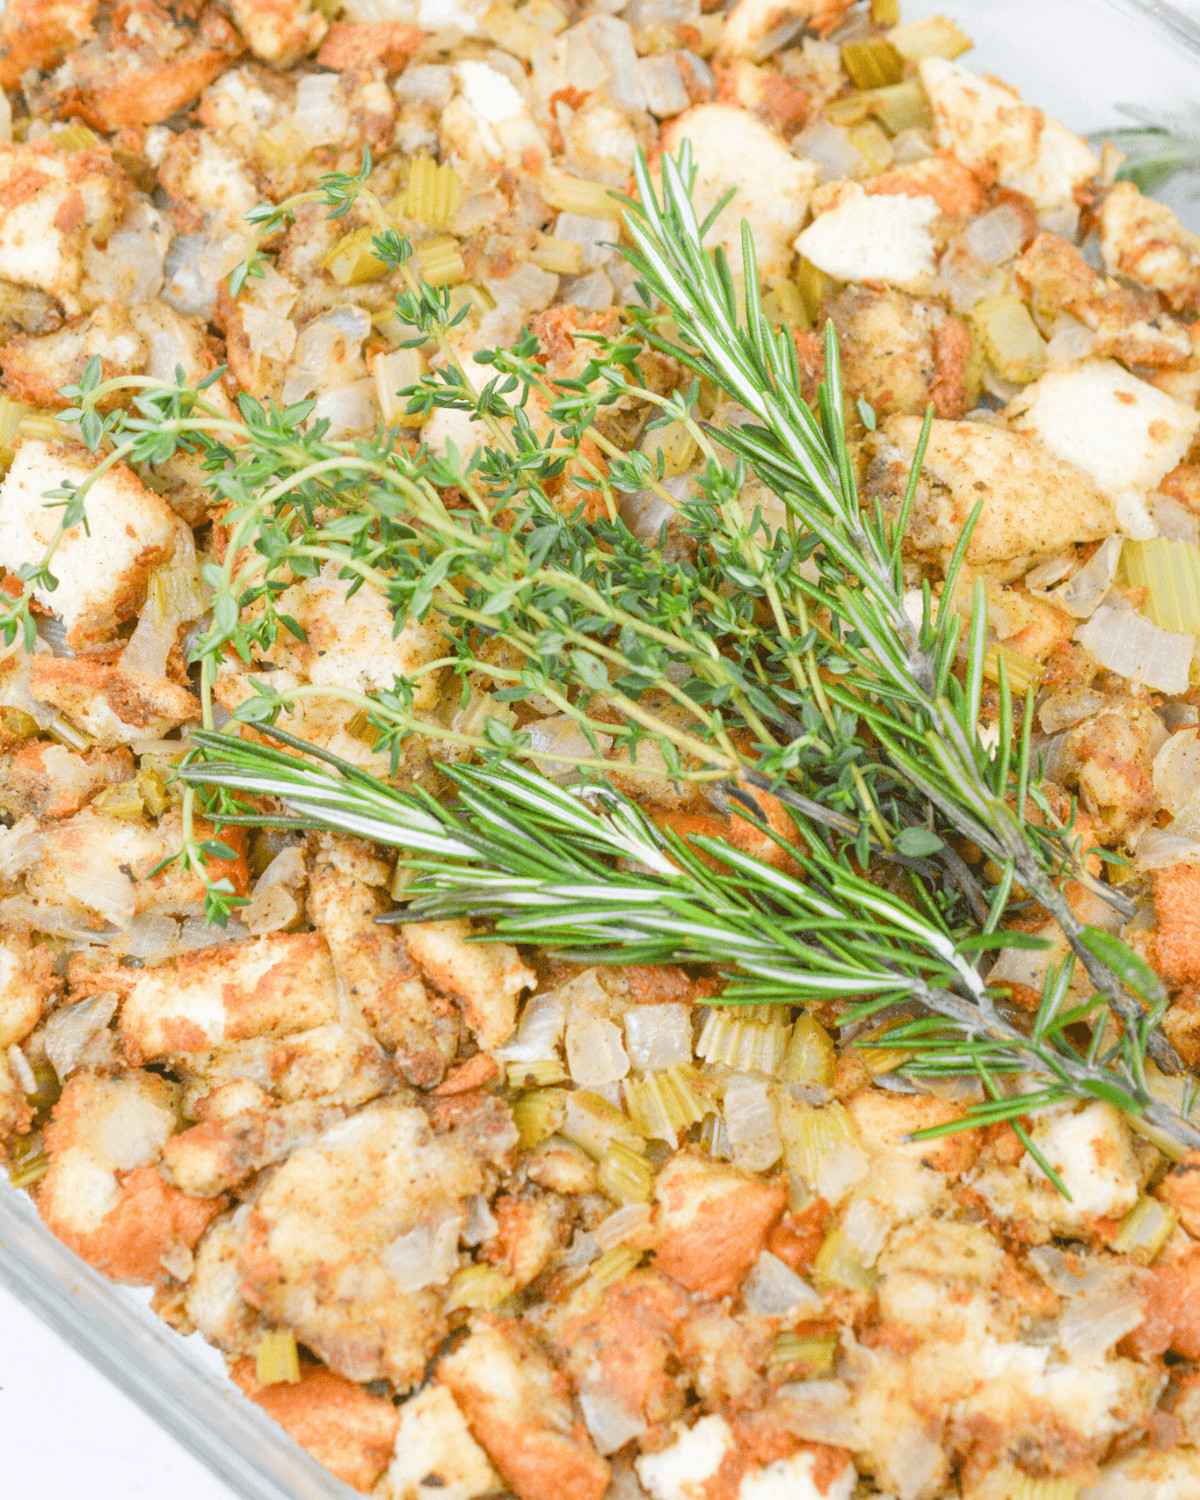 A close up of the sage stuffing with fresh rosemary on top.